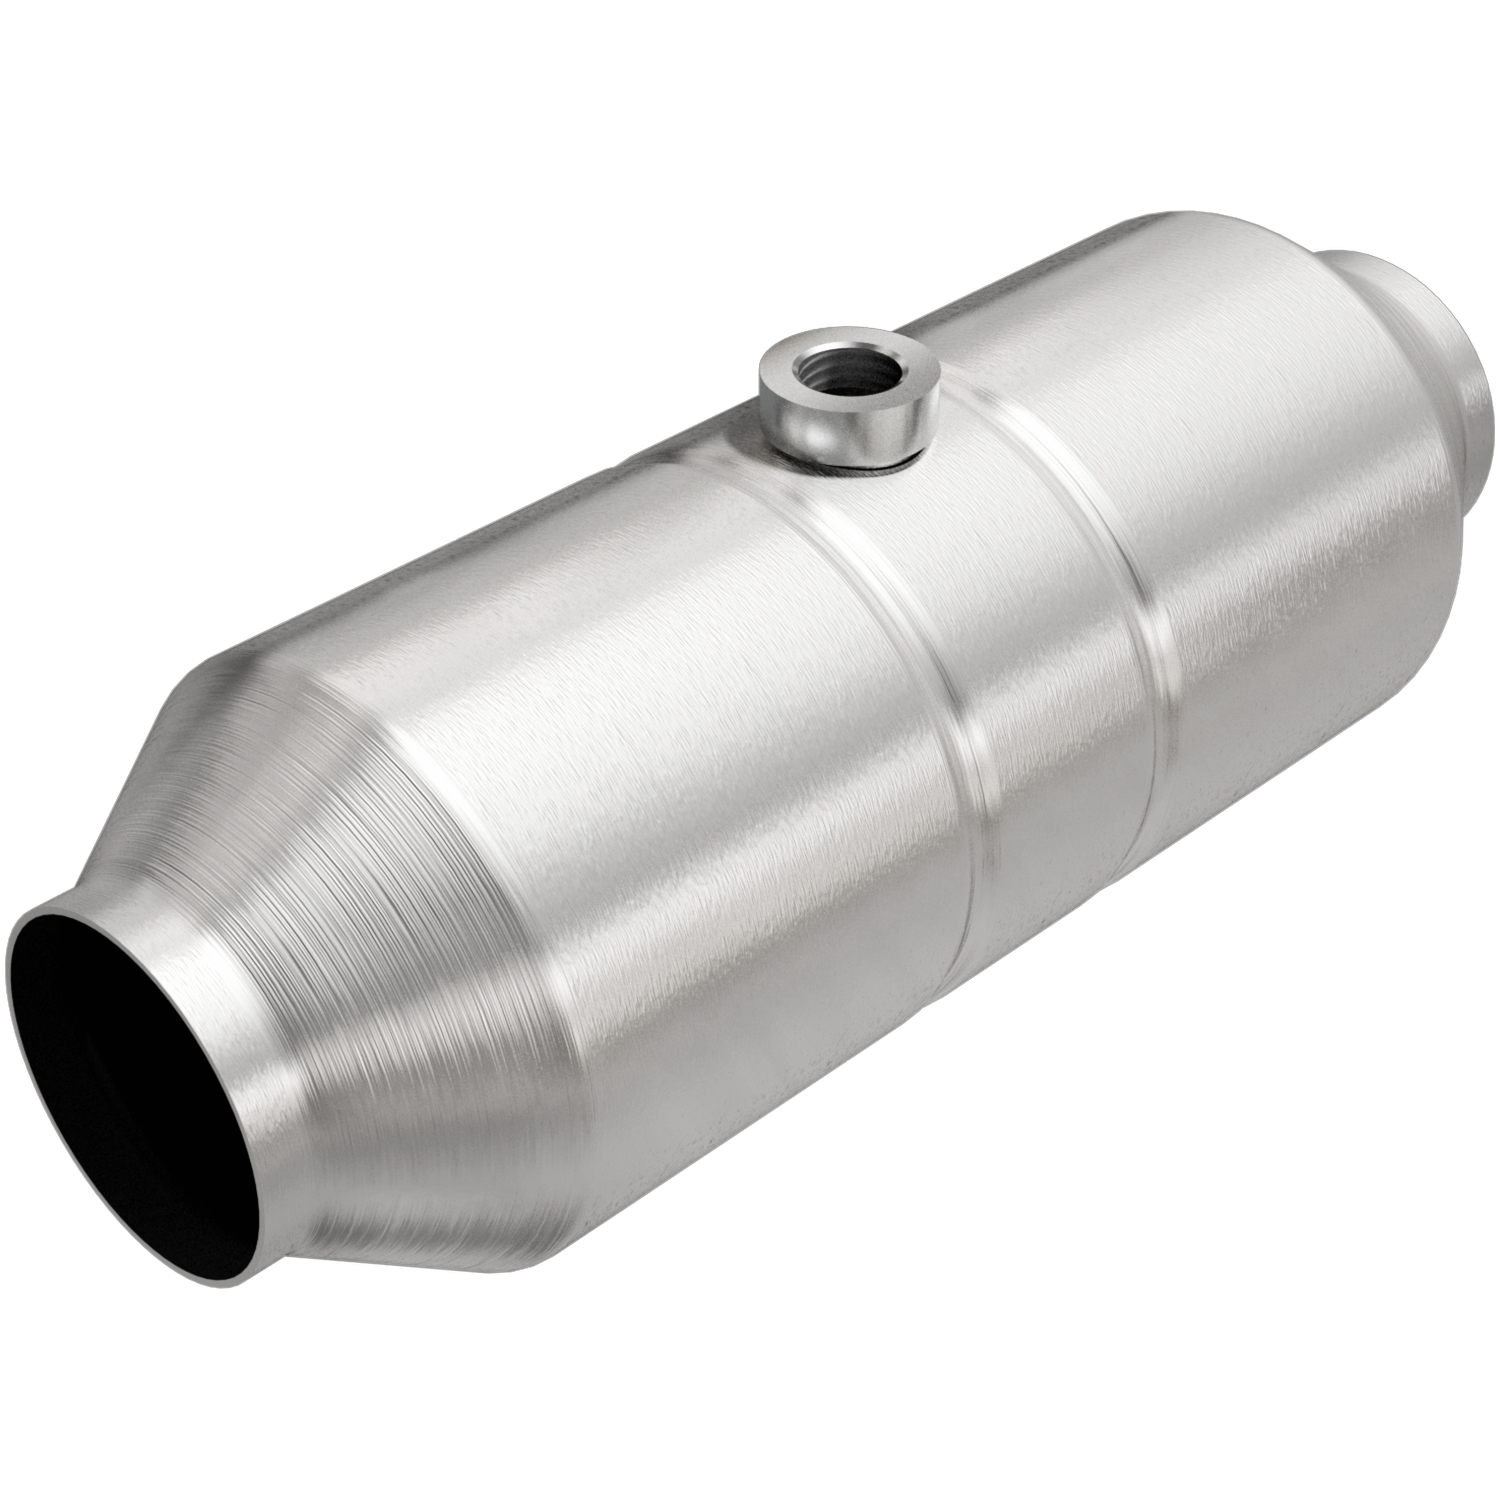 California Emissions OBD-II Spun Catalytic Converter Inlet/Outlet: 2"